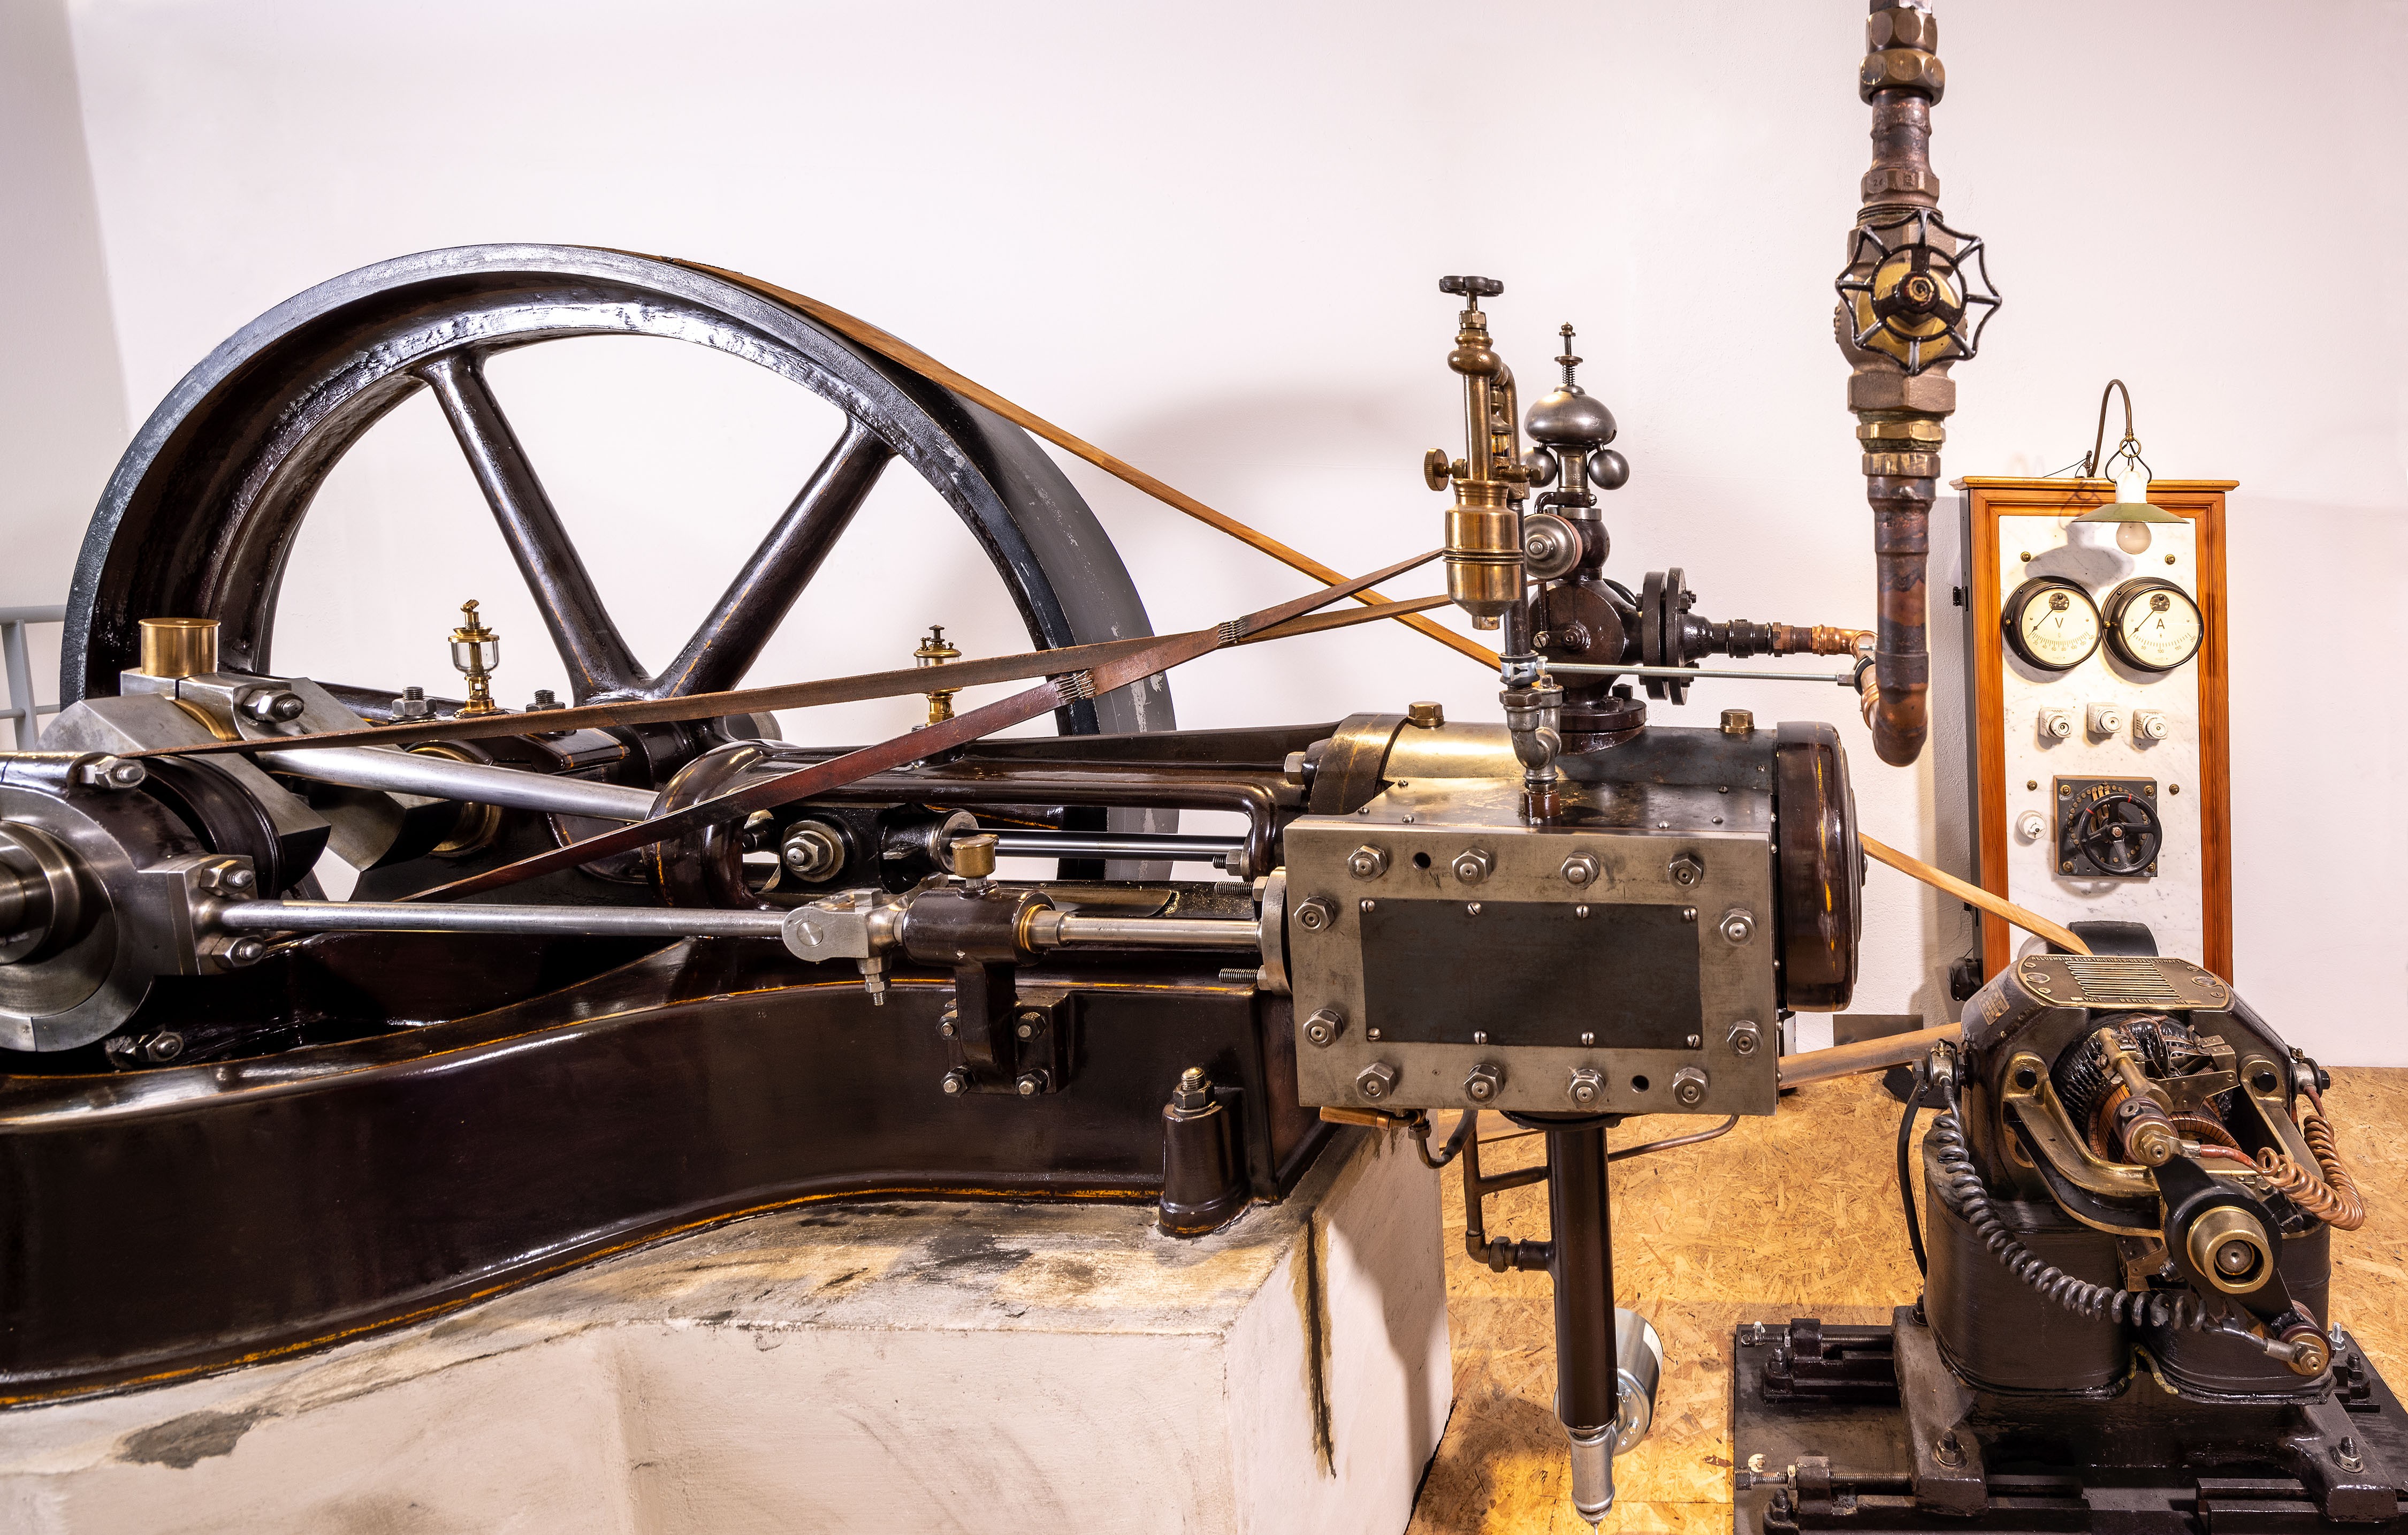 The imposing steam engine serves as a reminder that there was not always sufficient waterpower available to power the machines. Therefore early on steam power was used at Ermen & Engels as supplementary energy. The steam engine exhibited has an output of 30 PS.